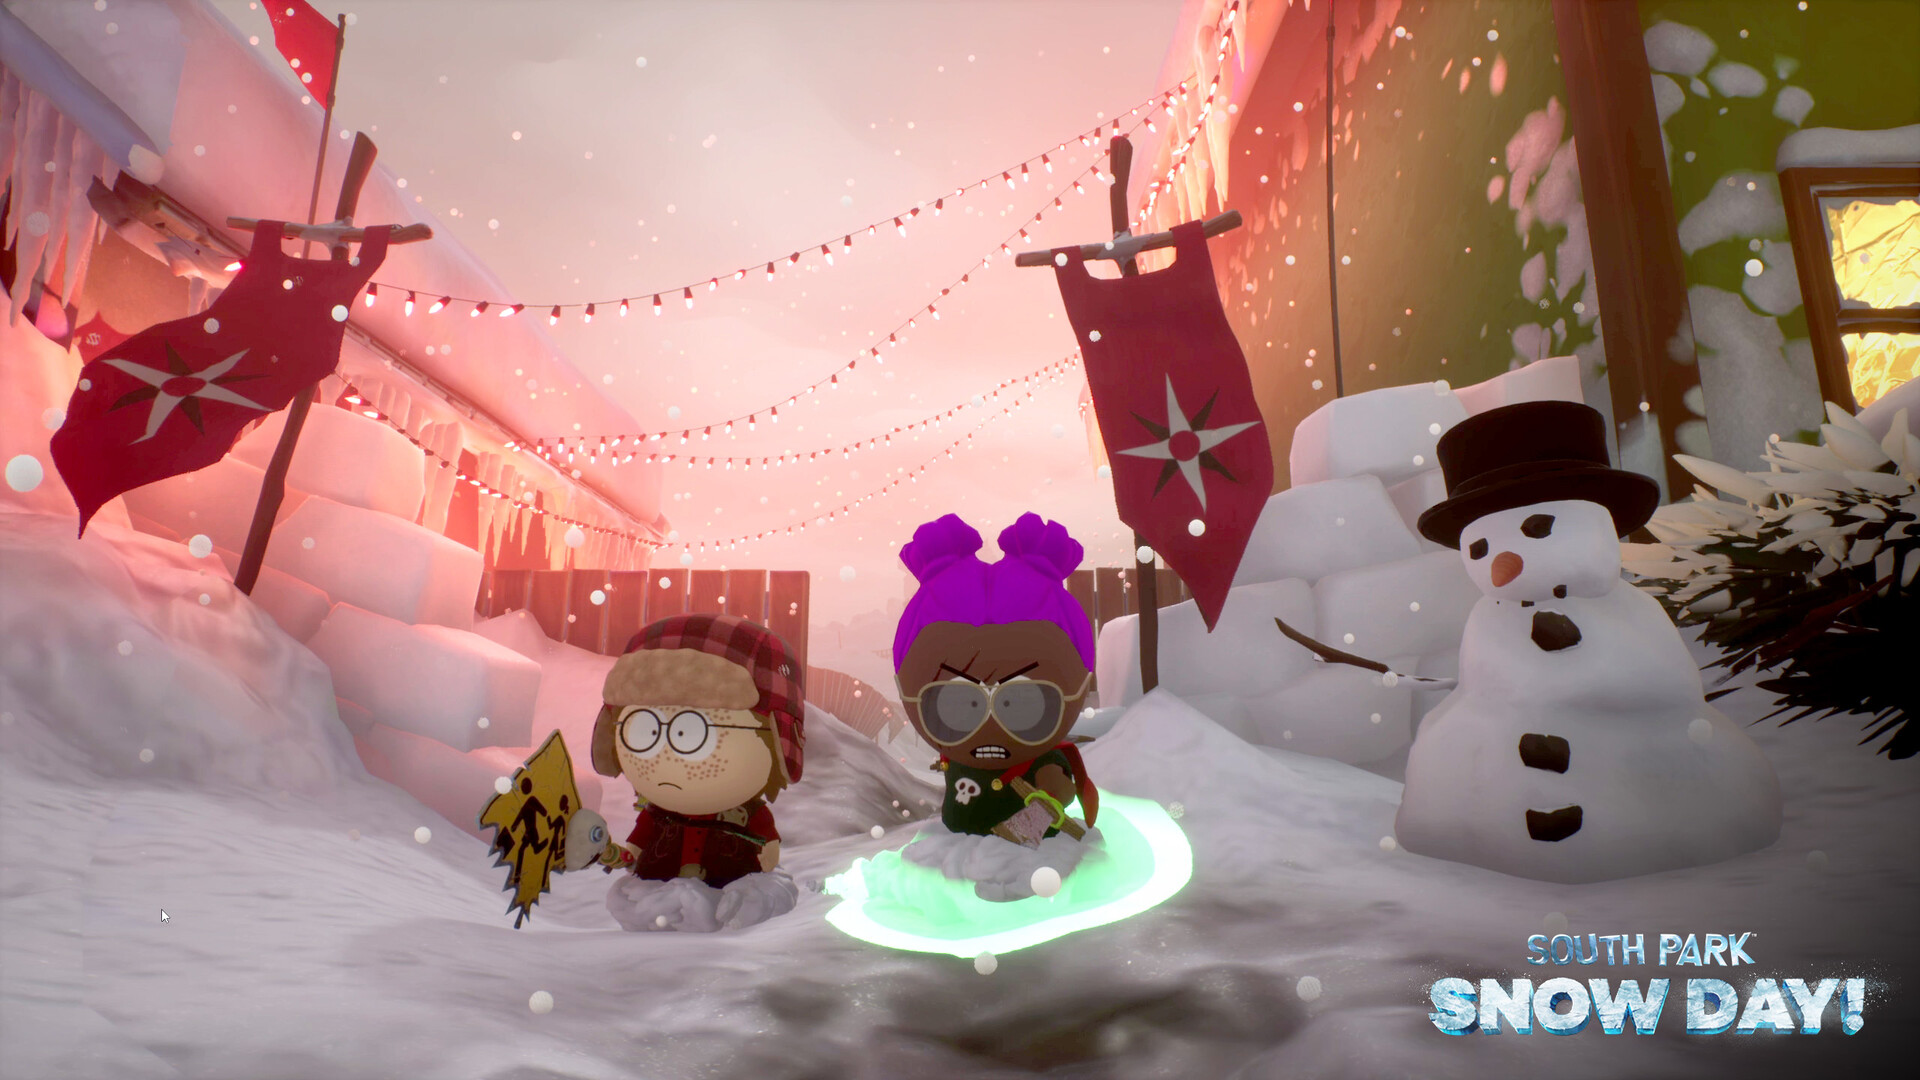 South Park: Snow Day! Playstation 5 Account